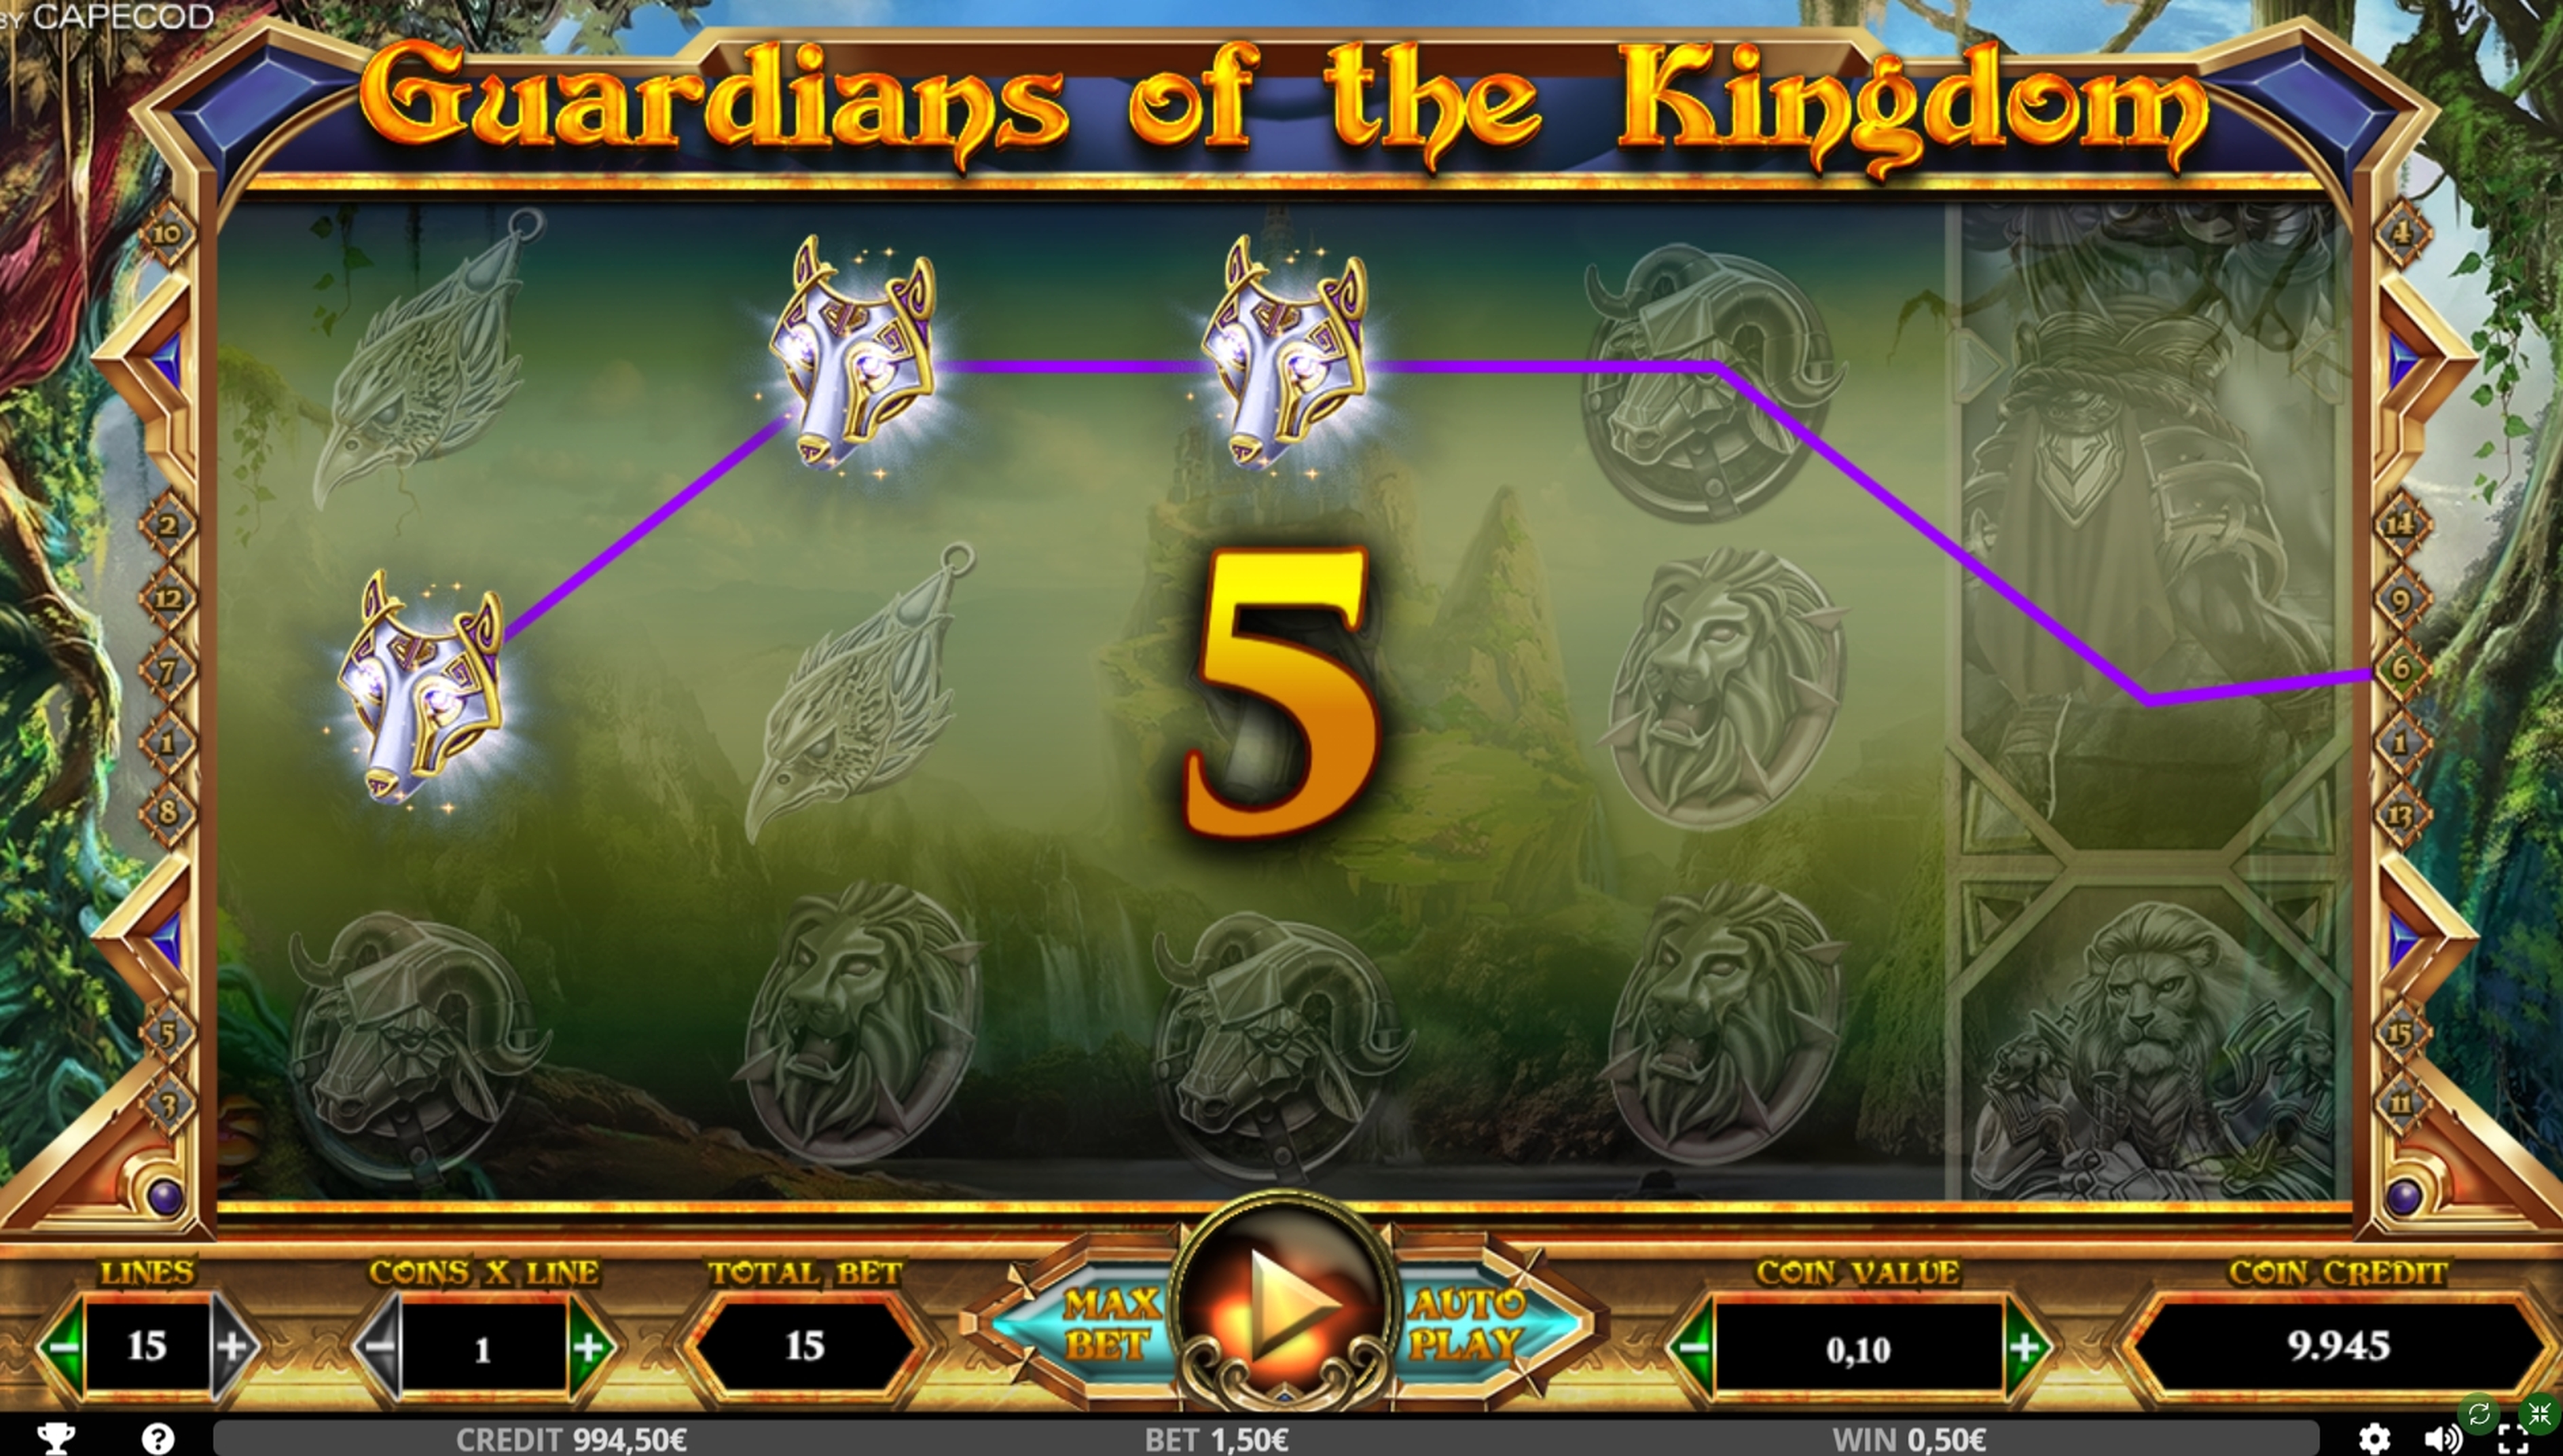 Win Money in Guardians of the Kingdom Free Slot Game by Capecod Gaming